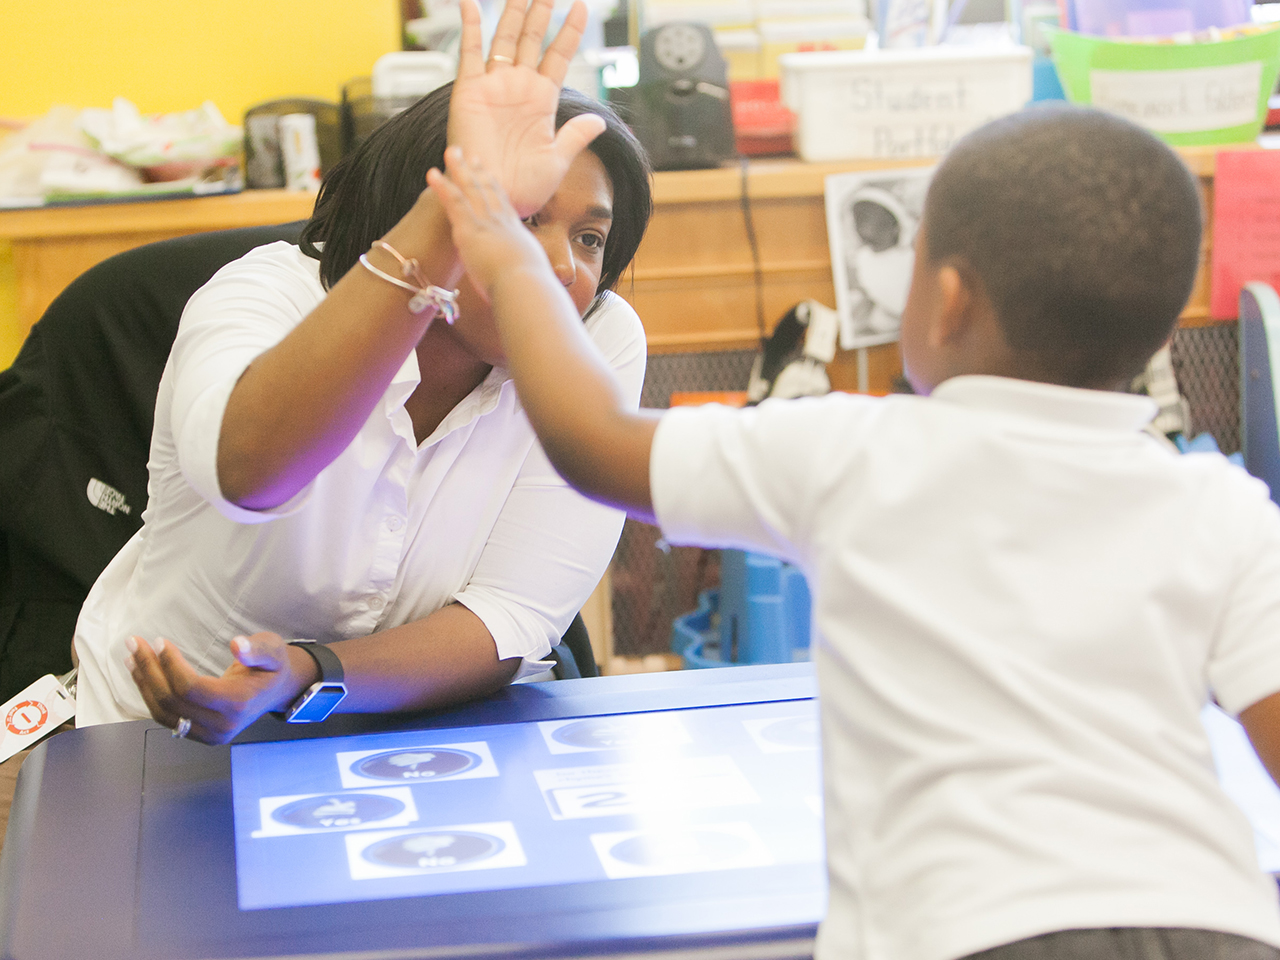 Learning centers established in Newark for parents balancing professional life, helping educate their children